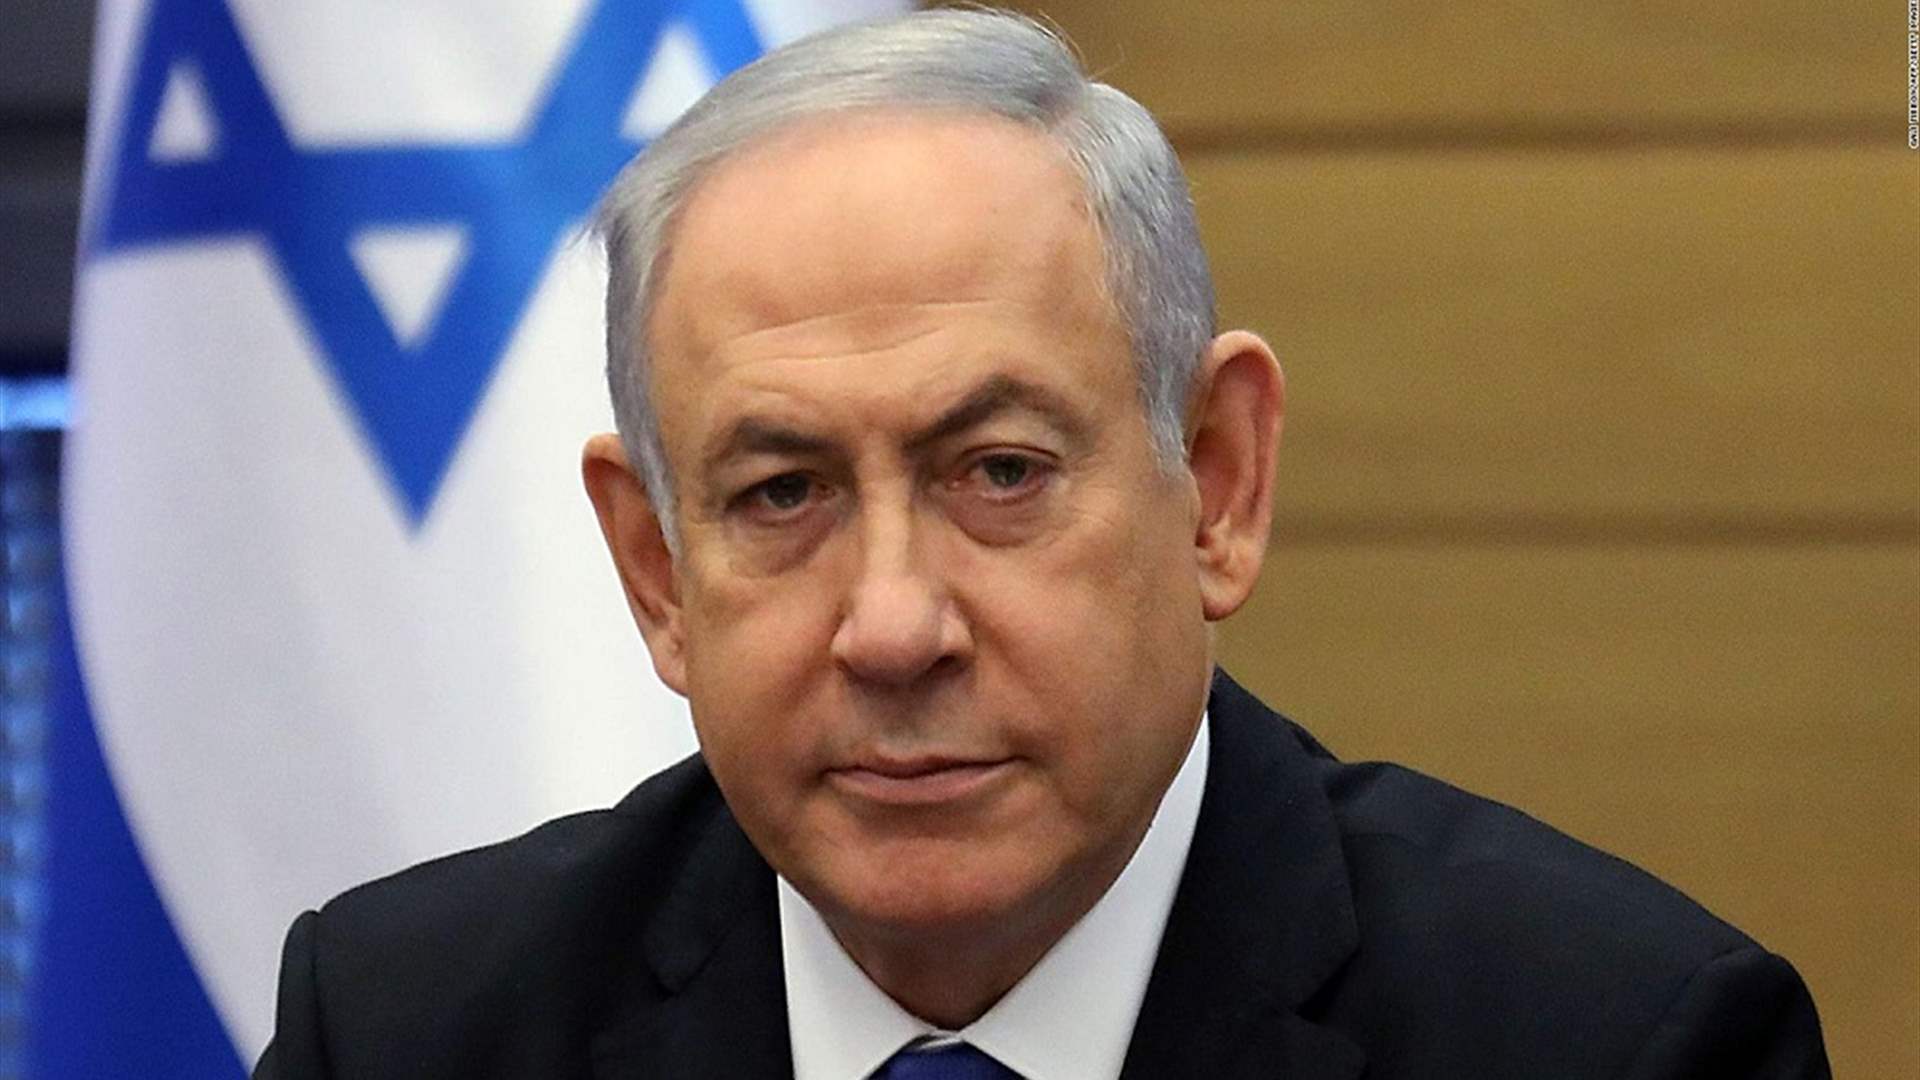 Netanyahu and his allies survive the growing international pressure?